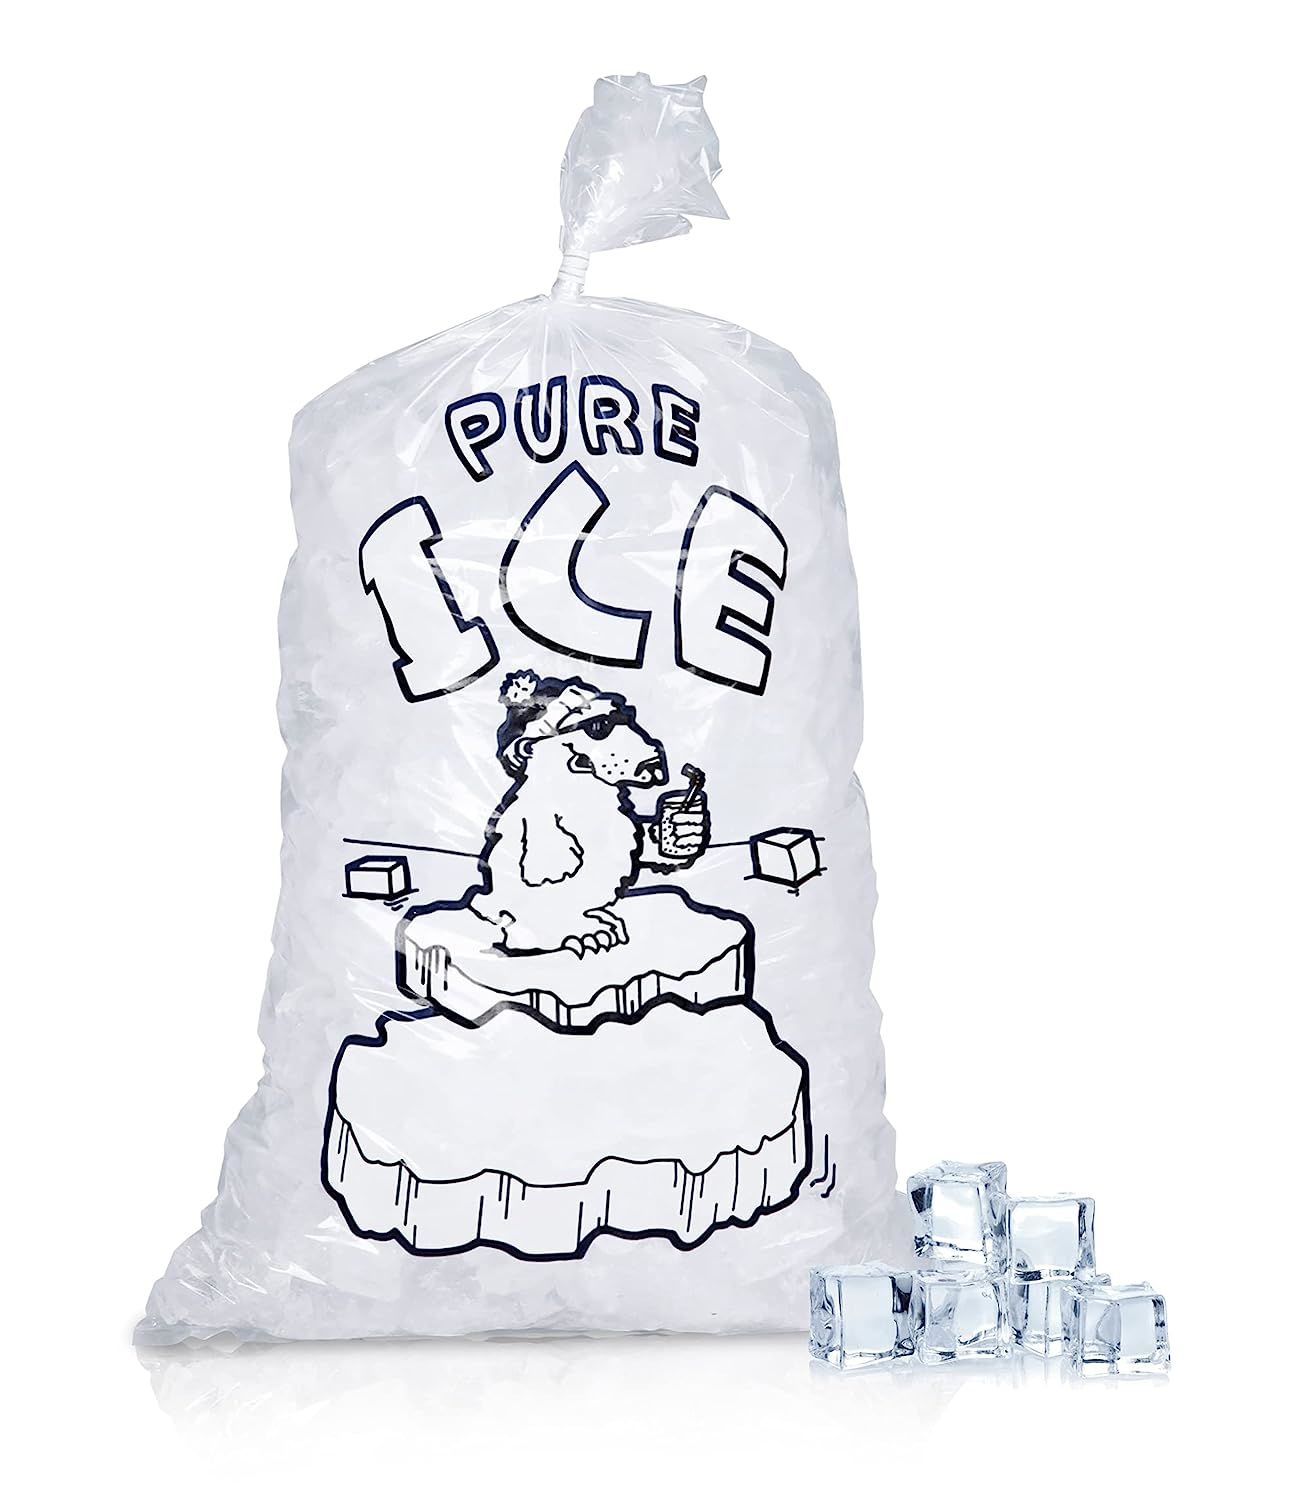 Pack of 1000 Wicket Ice Bags 12 x 20 + 3. Polar Bear Printed Icebags 12x20. Thickness 1.5 mil. 10 lbs